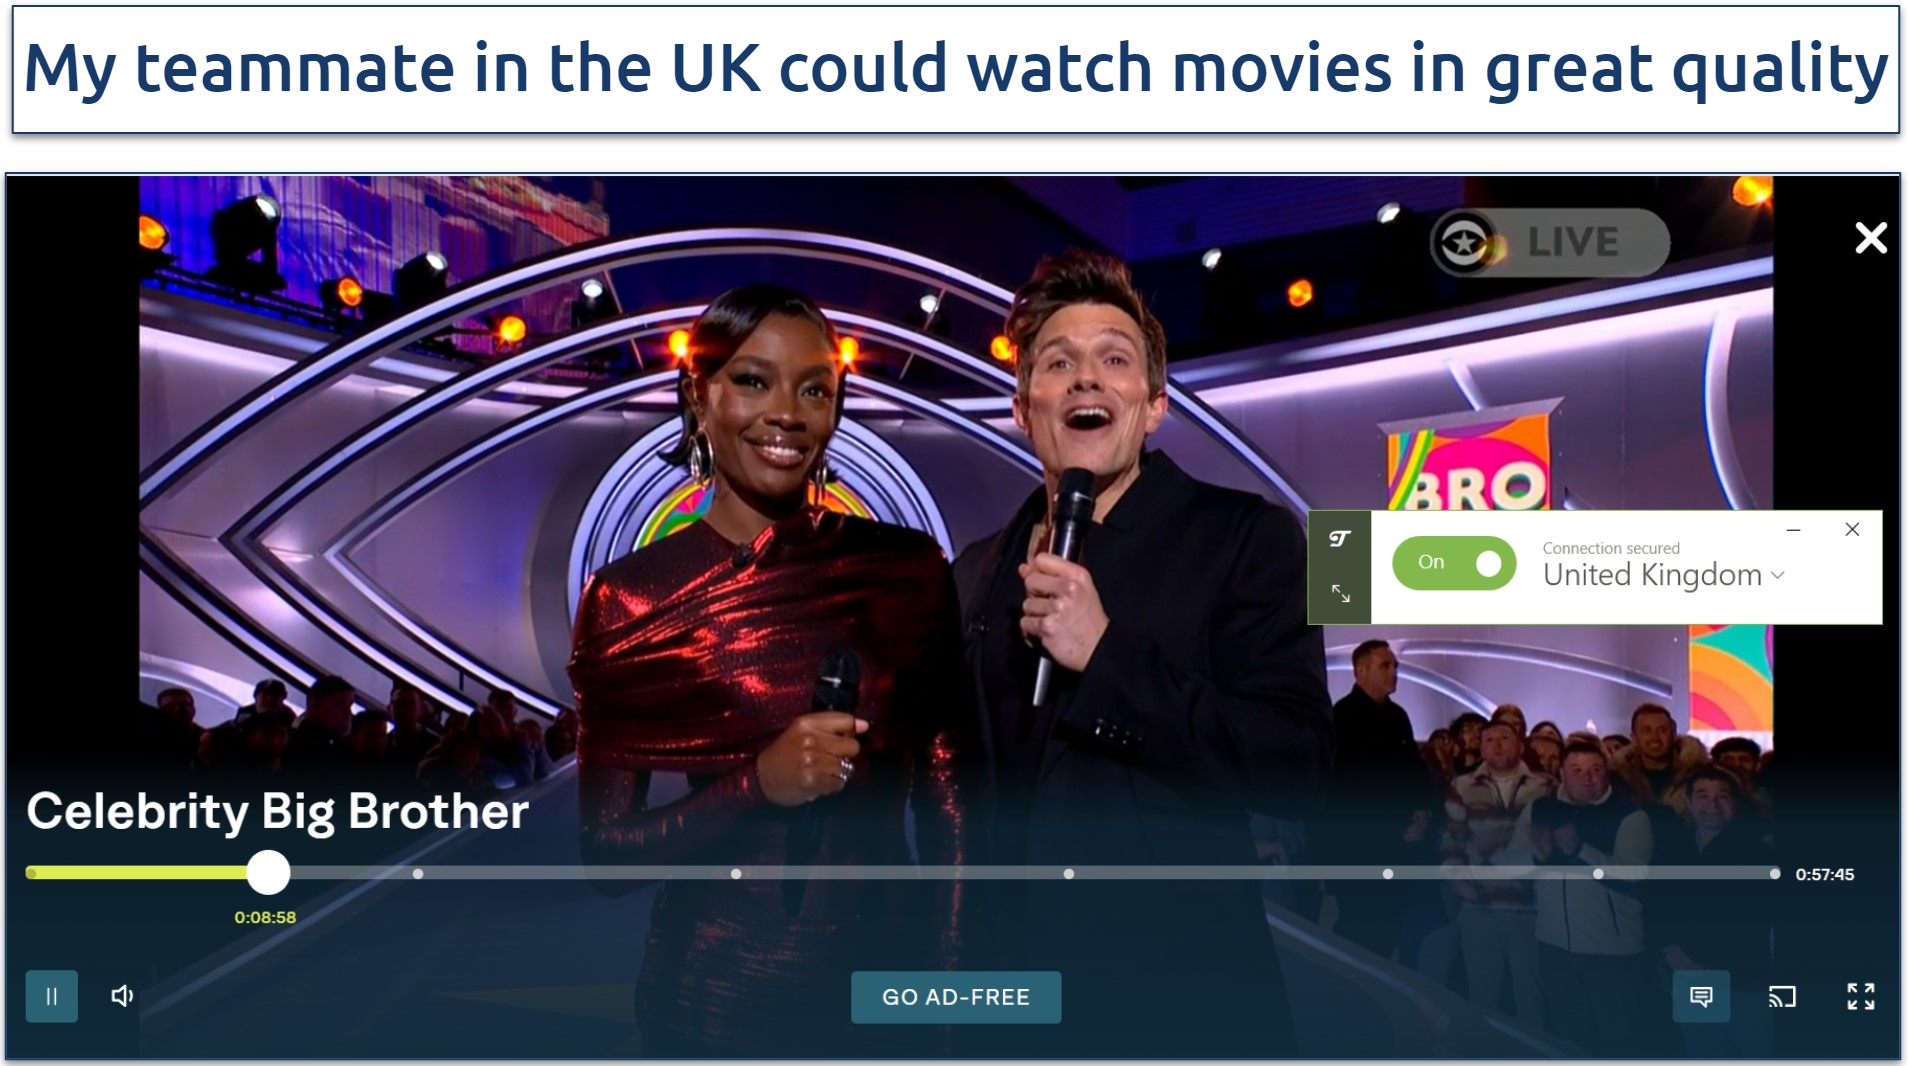 A screenshot of ITV streaming Celebrity Big Brother while connected to TunnelBear's UK server